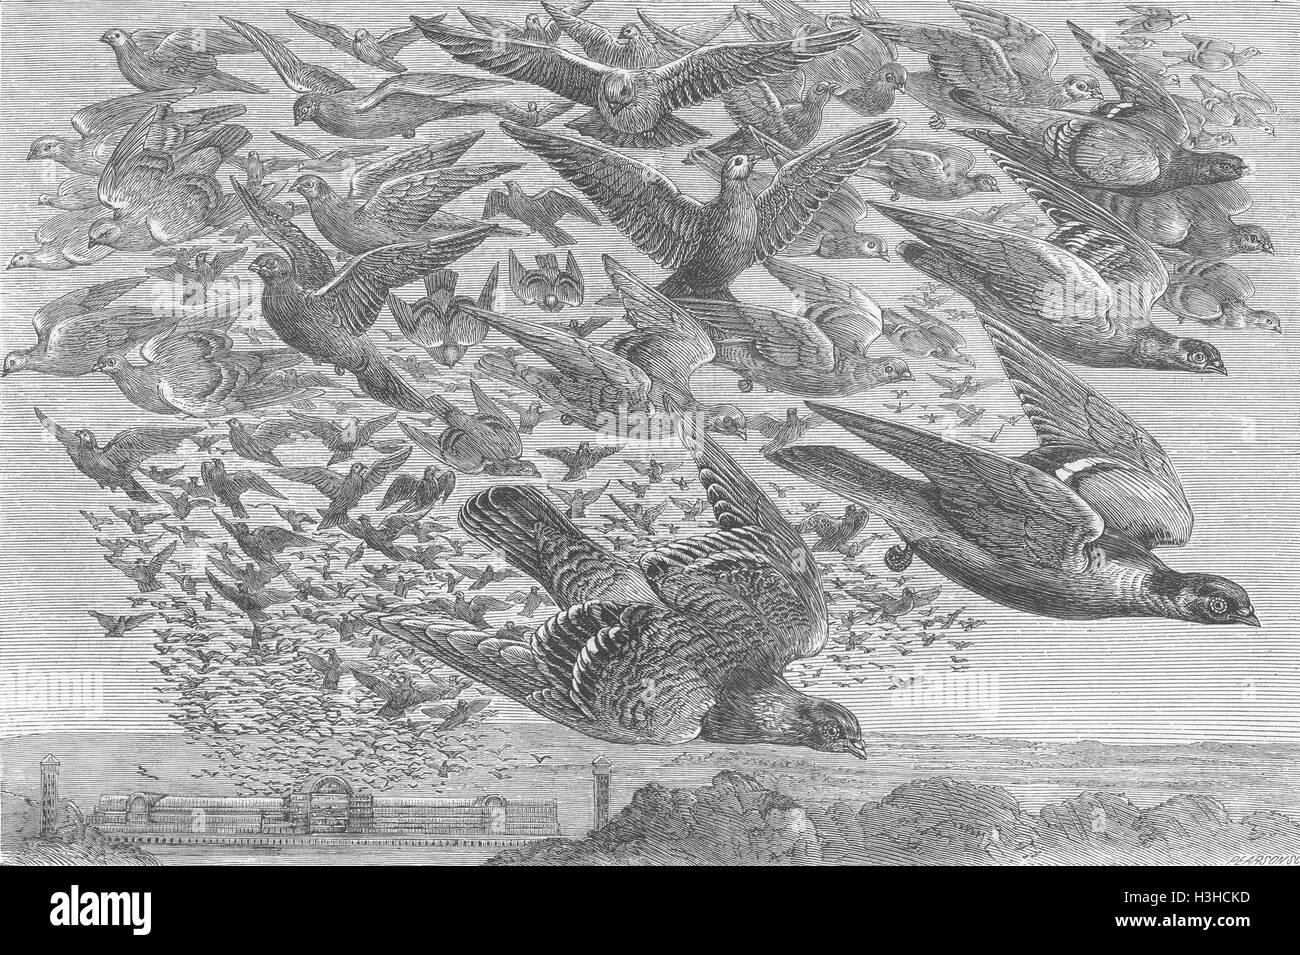 LONDON Flight of pigeons from Crystal Palace 1871. The Graphic Stock Photo